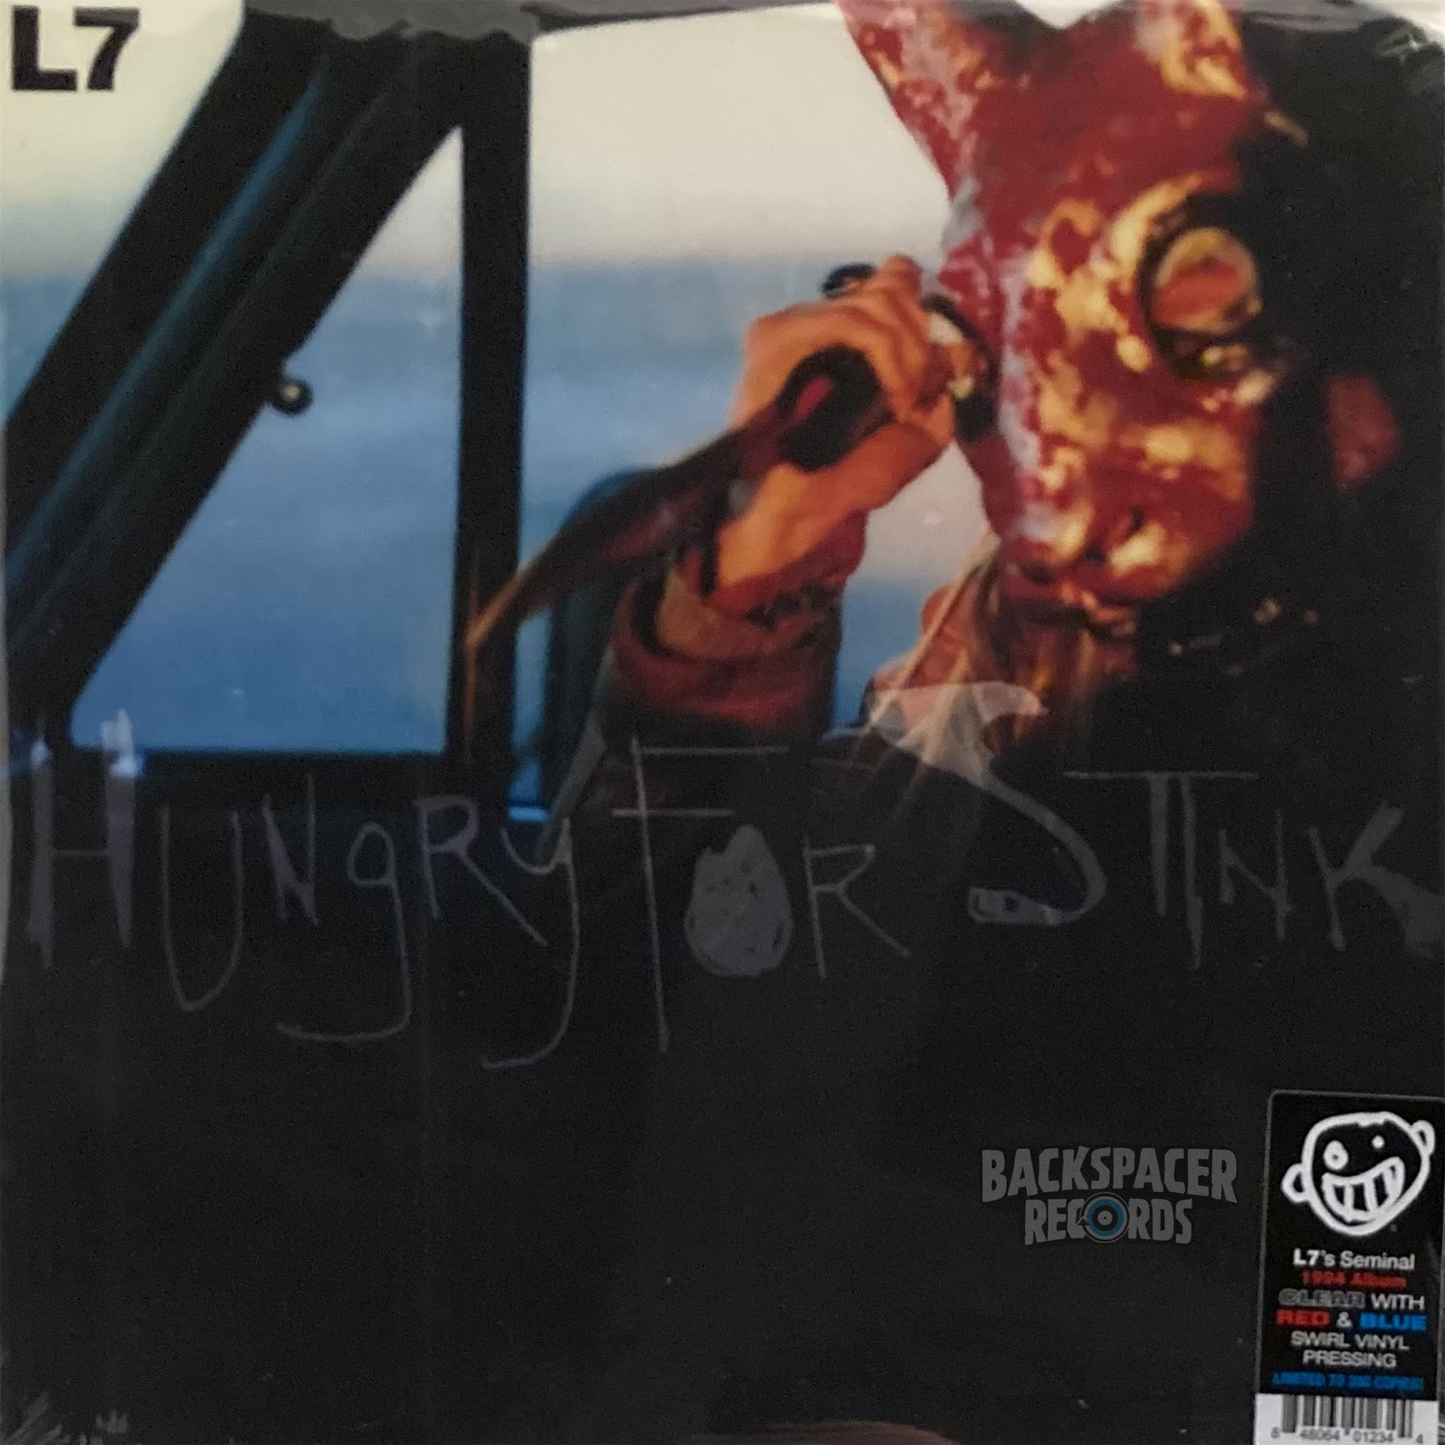 L7 – Hungry For Stink (Limited Edition) LP (Sealed)